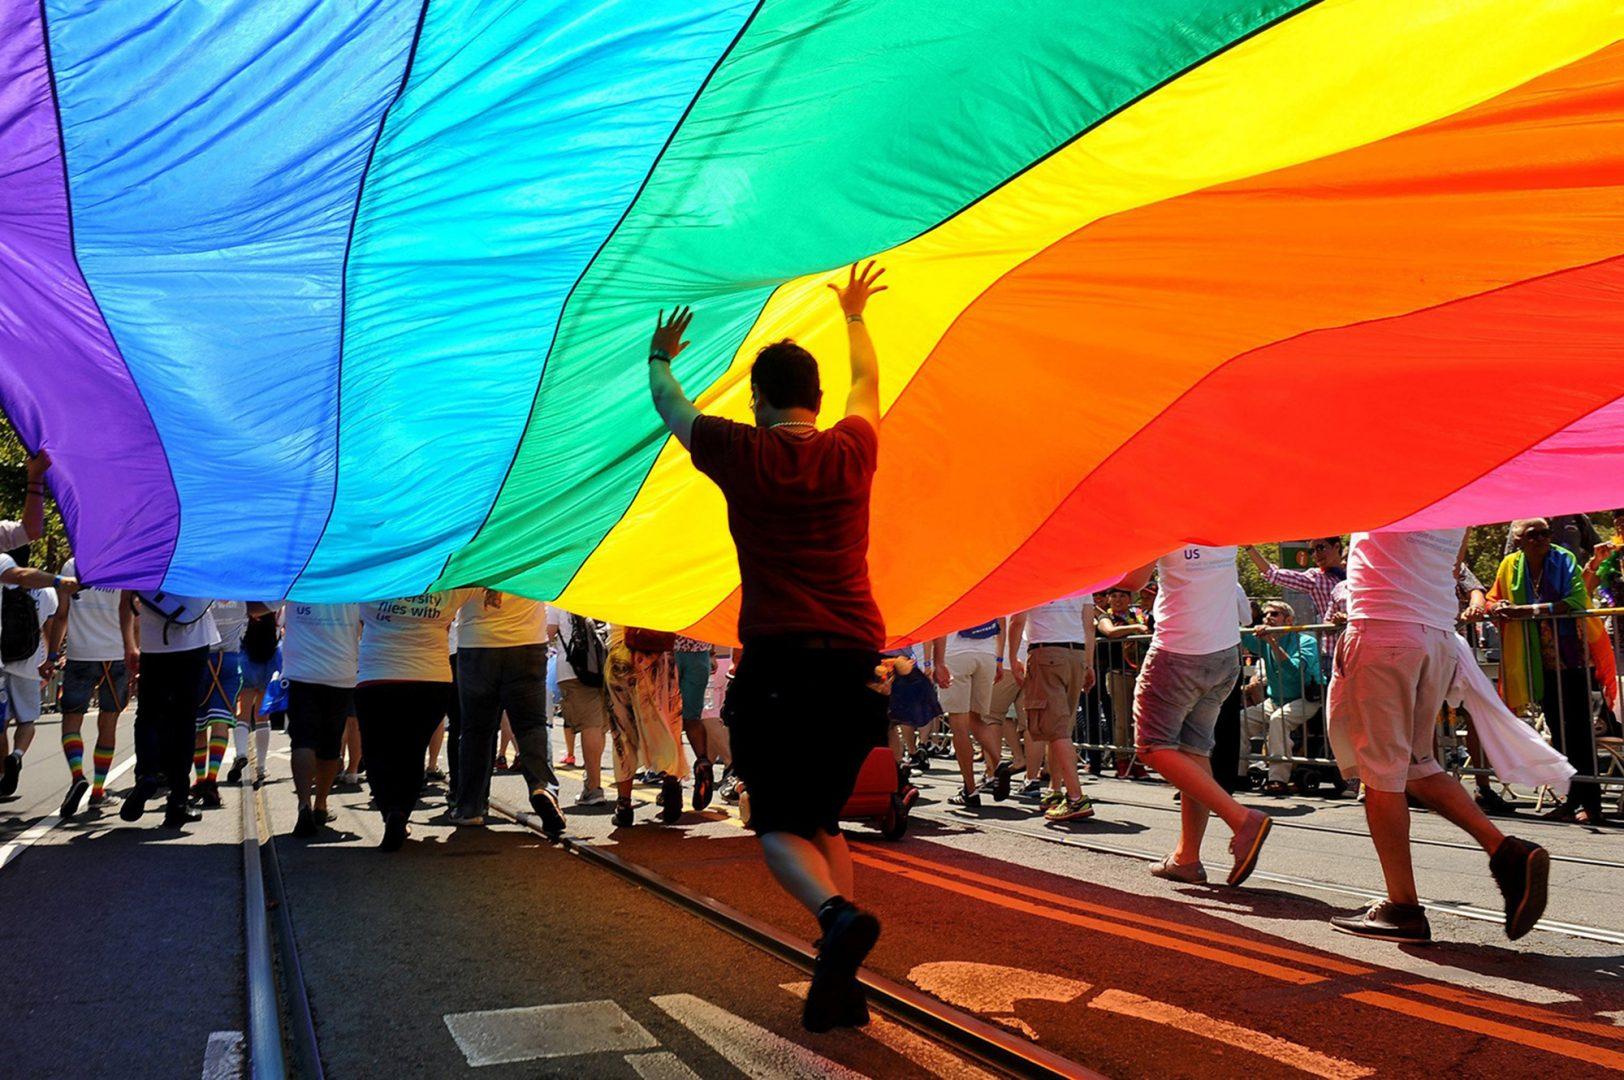 Parade participants march down Market Street carrying the rainbow flag during the annual Gay Pride parade in San Francisco on June 30, 2013. (Wally Skalij/Los Angeles Times/TNS)